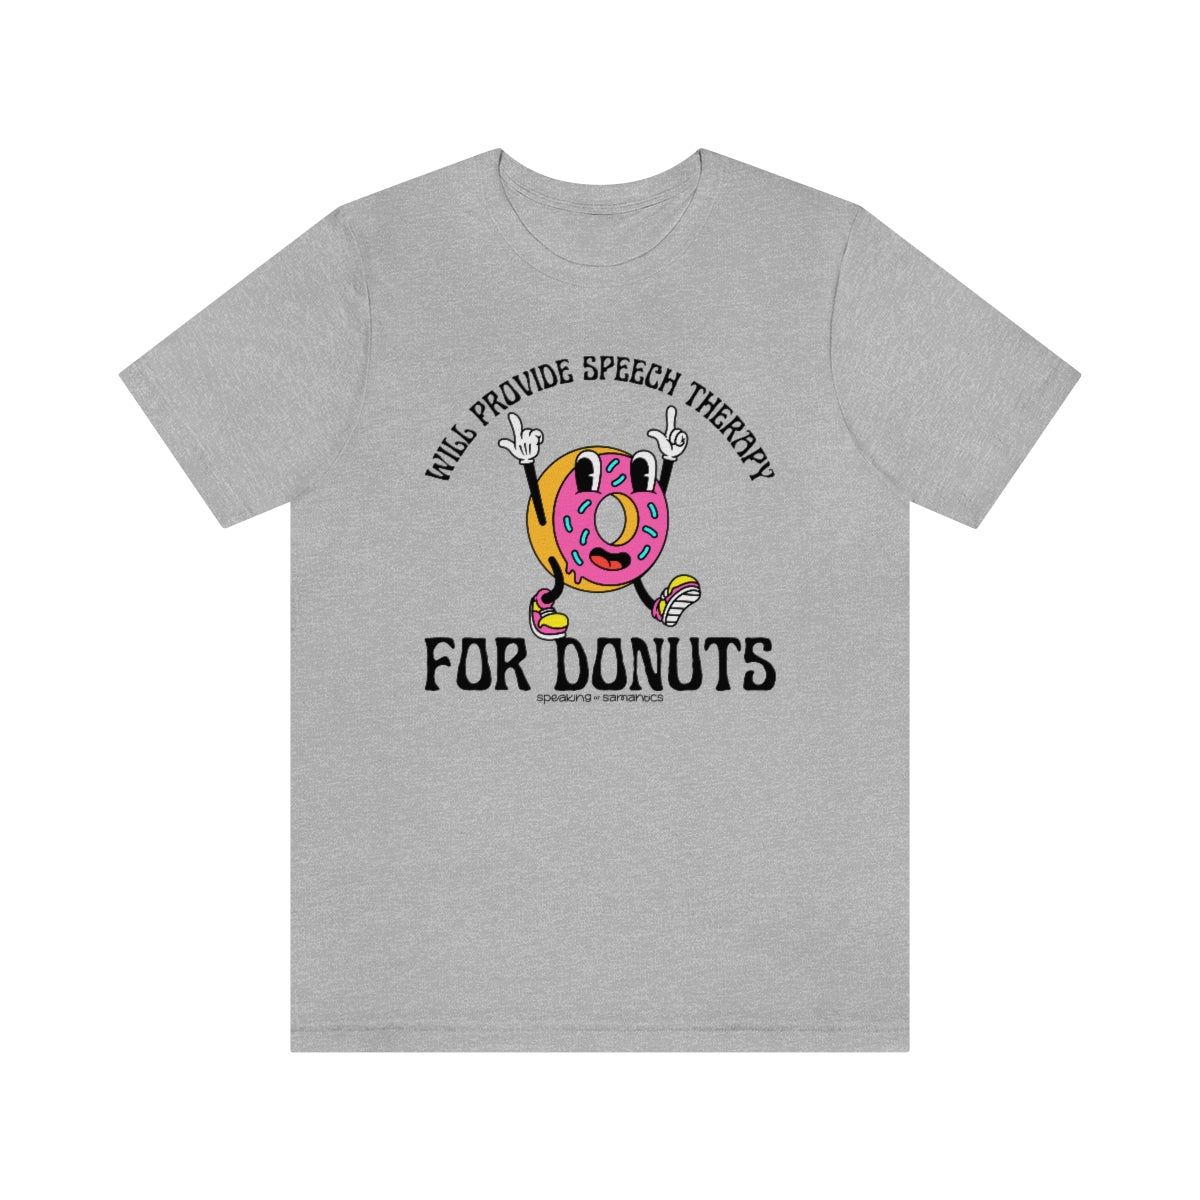 Will Provide Speech Therapy For Donuts Tee